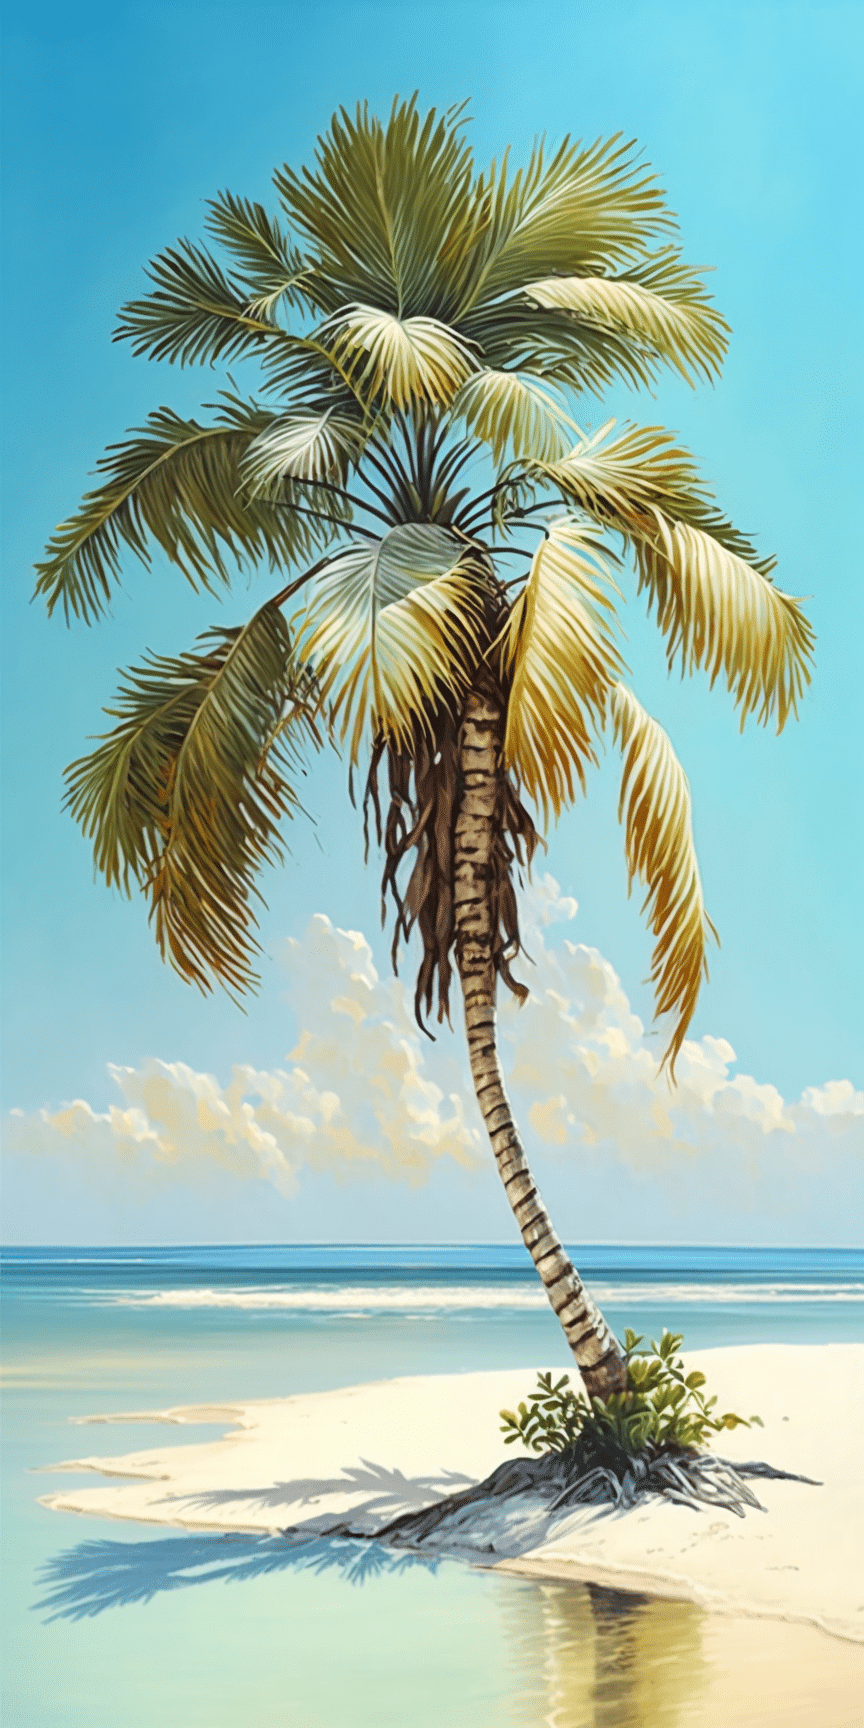 IT Support - AI Image of a palm on a beach